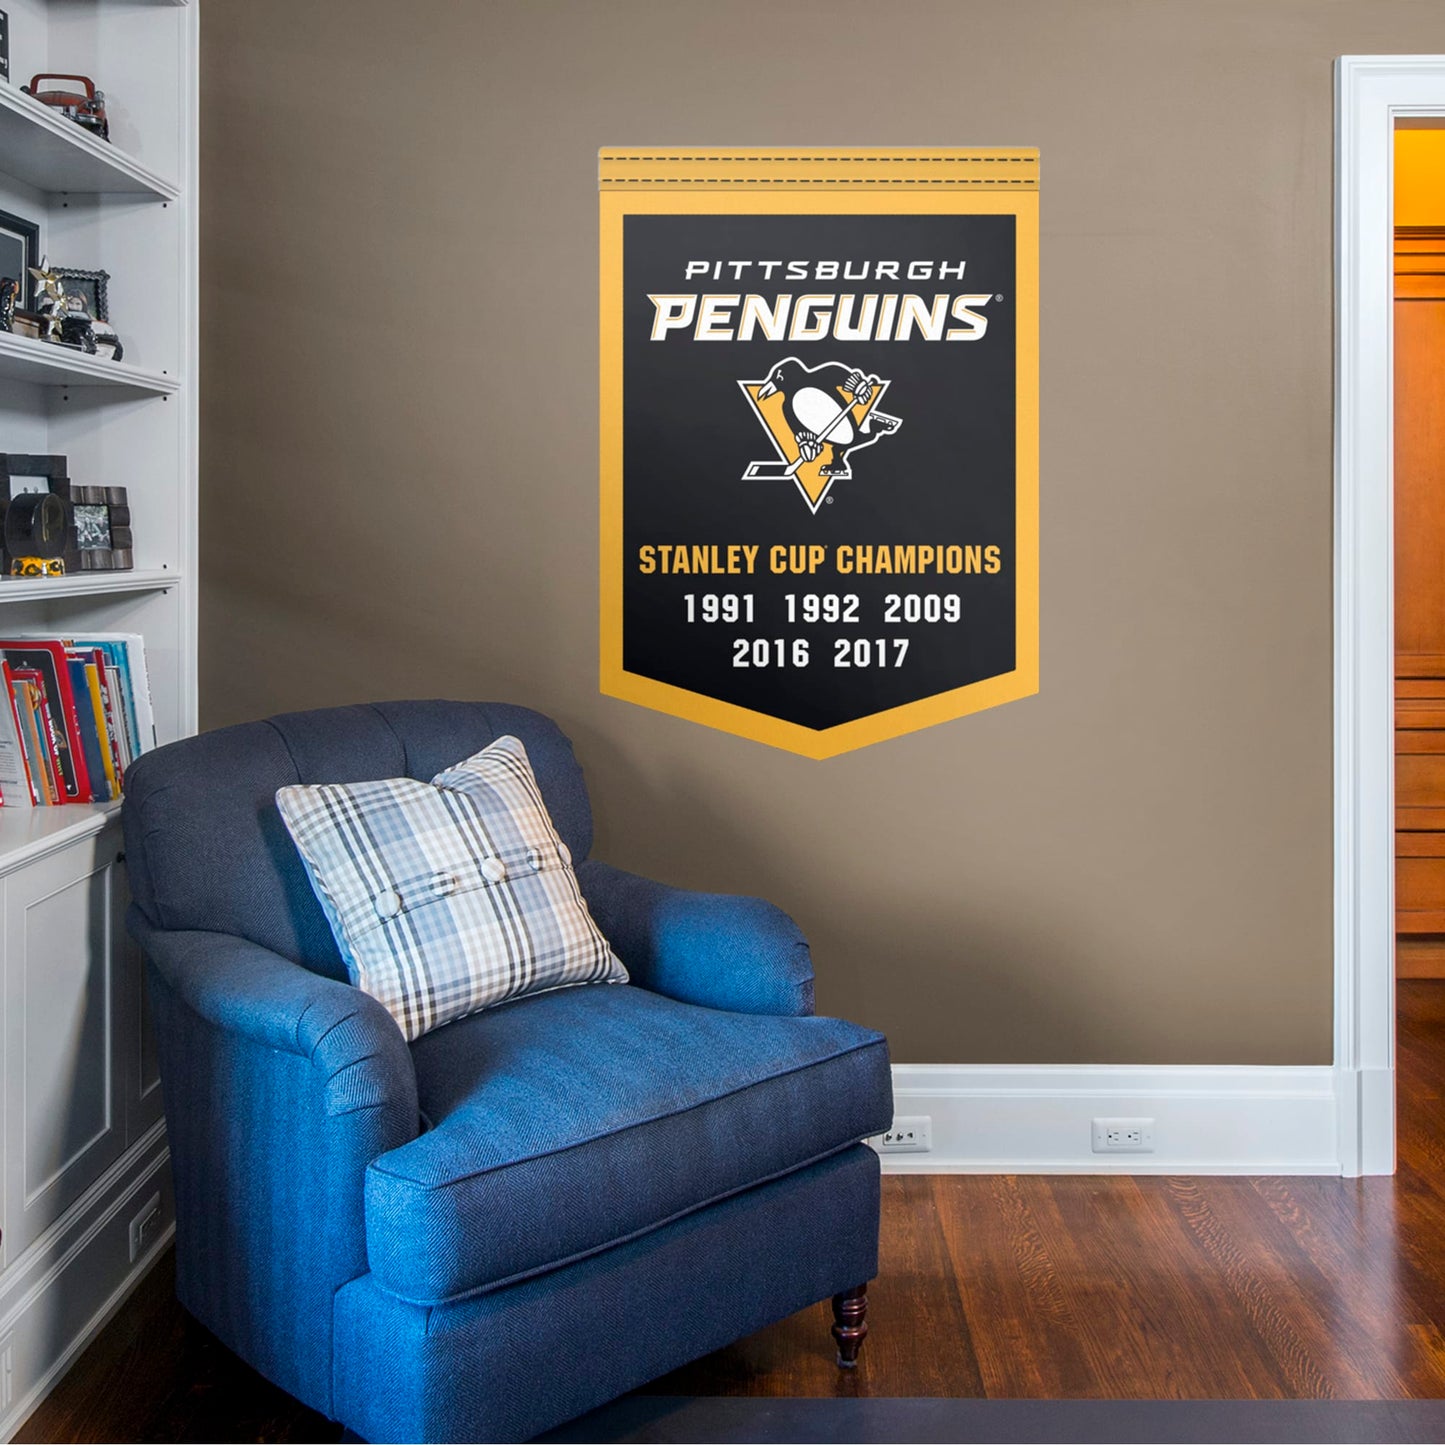 Pittsburgh Penguins: Stanley Cup Championships Banner - Officially Licensed NHL Removable Wall Decal